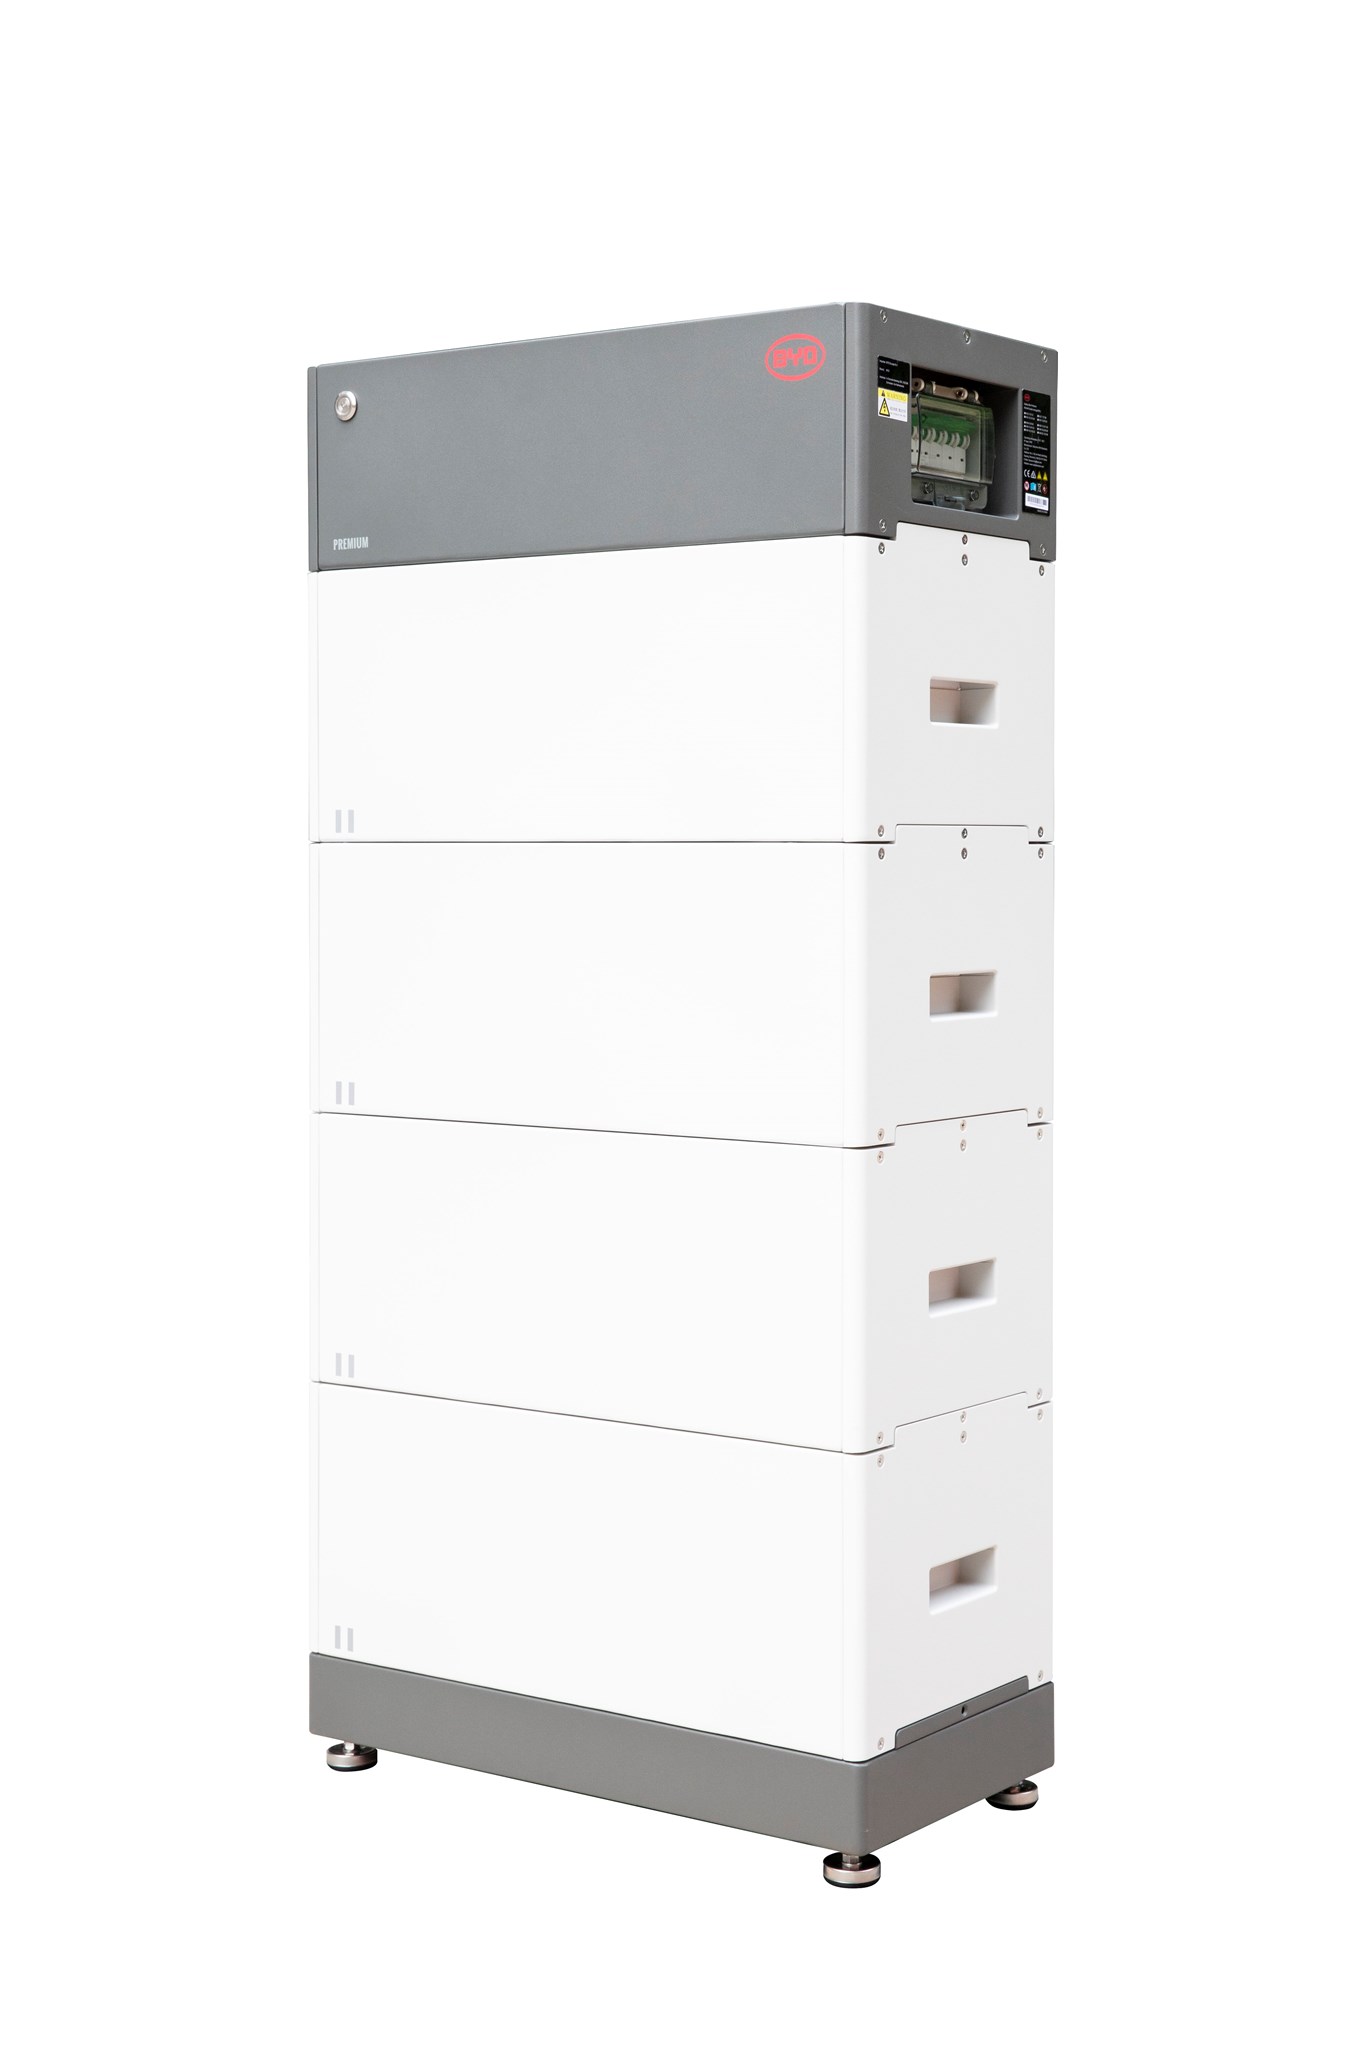 Picture of BYD Battery-Box Premium HVS 10.2 - 10.24 kW (PV battery storage)